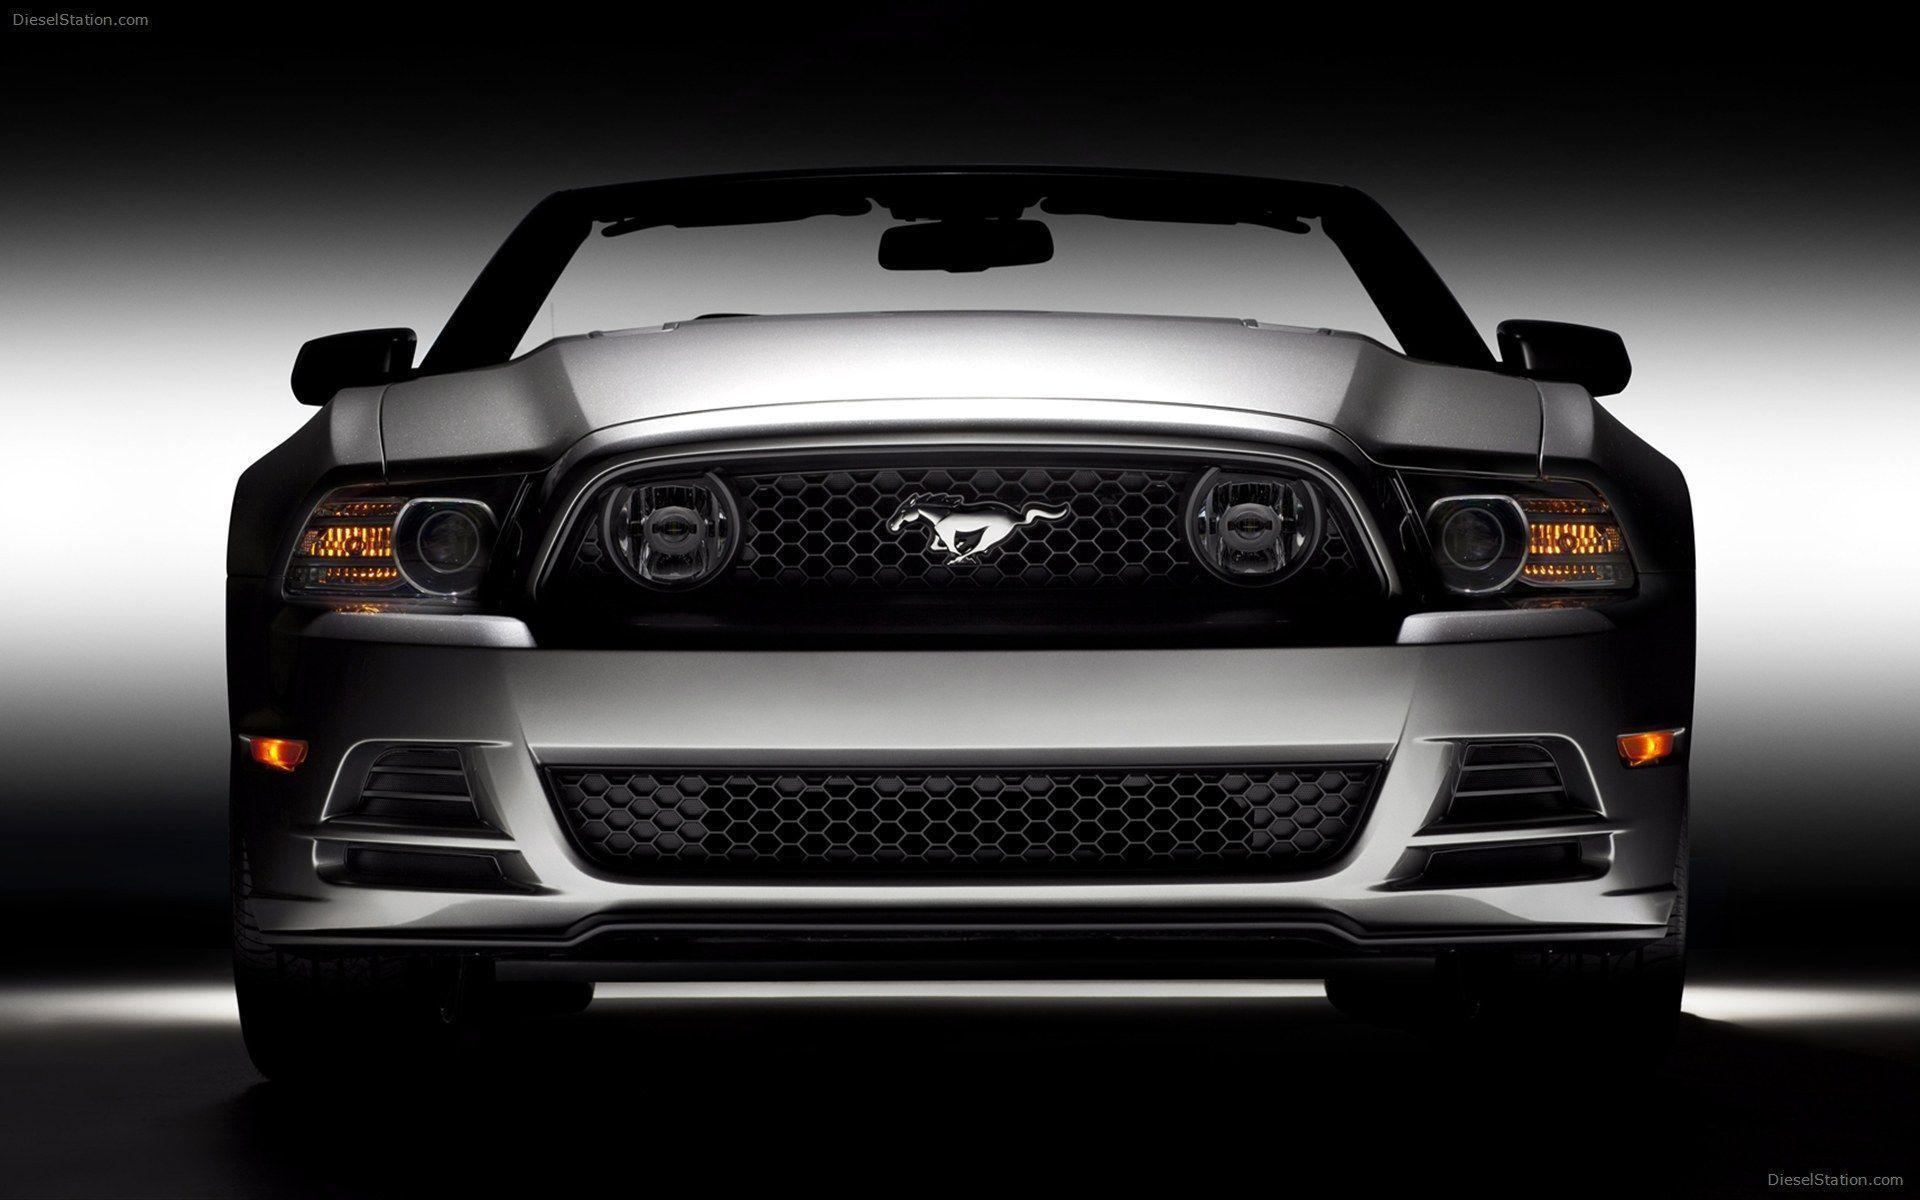 Ford Mustang GT 2013 Widescreen Exotic Car Wallpaper of 50